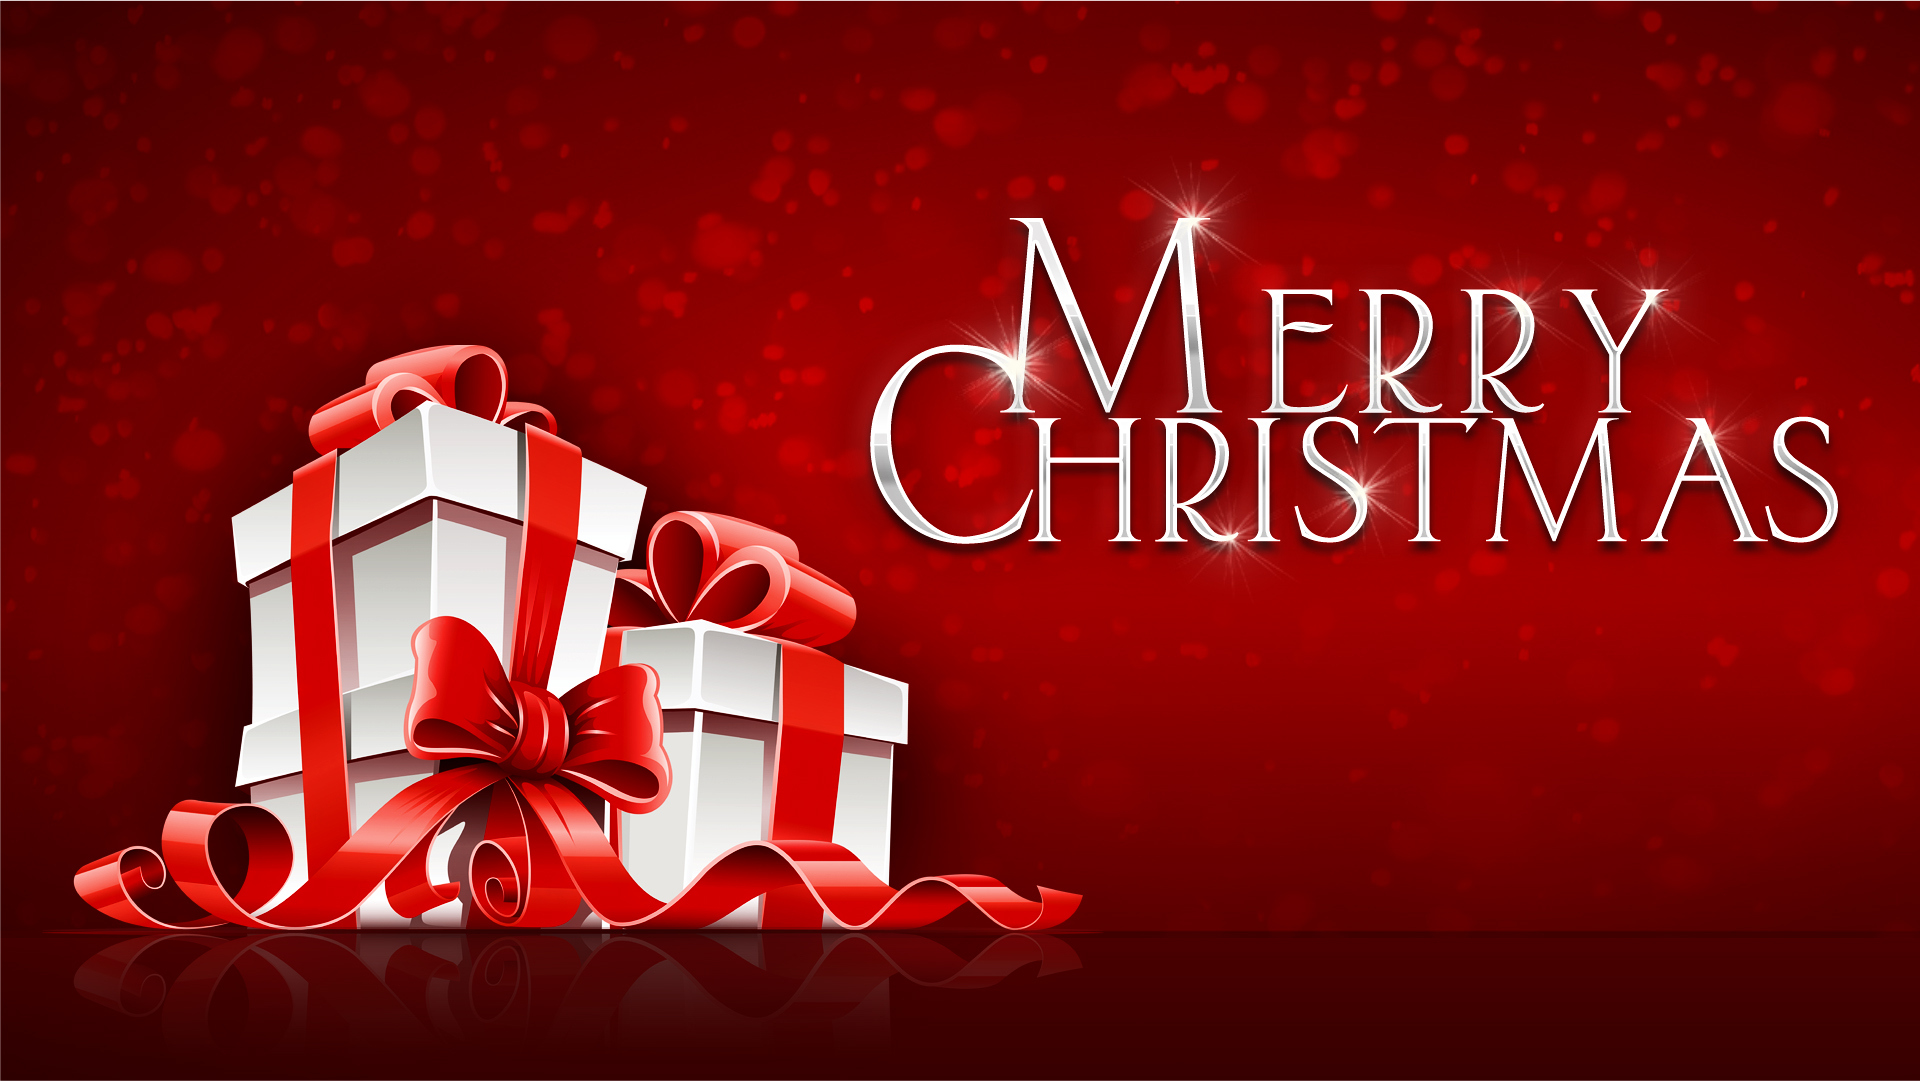 Free download merry christmas hd wallpaper merry christmas hd wallpaper ...